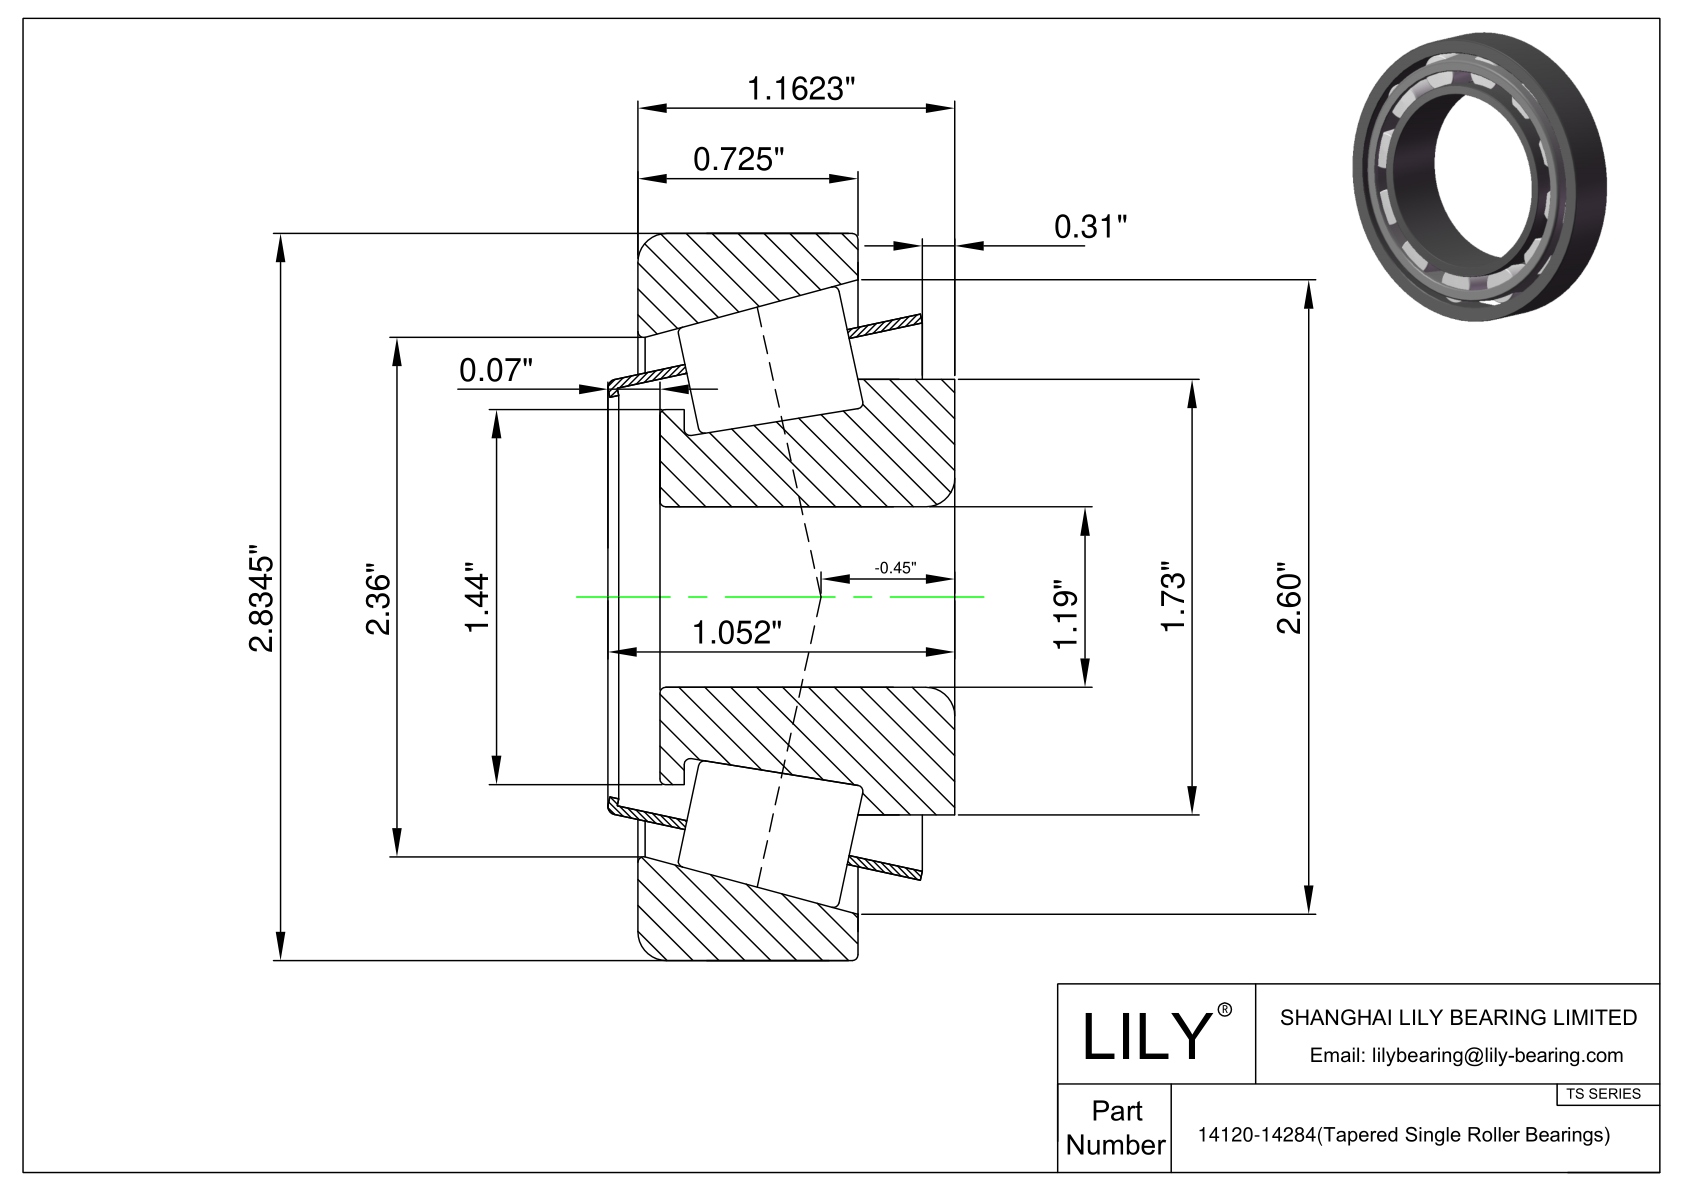 14120-14284 TS (Tapered Single Roller Bearings) (Imperial) cad drawing